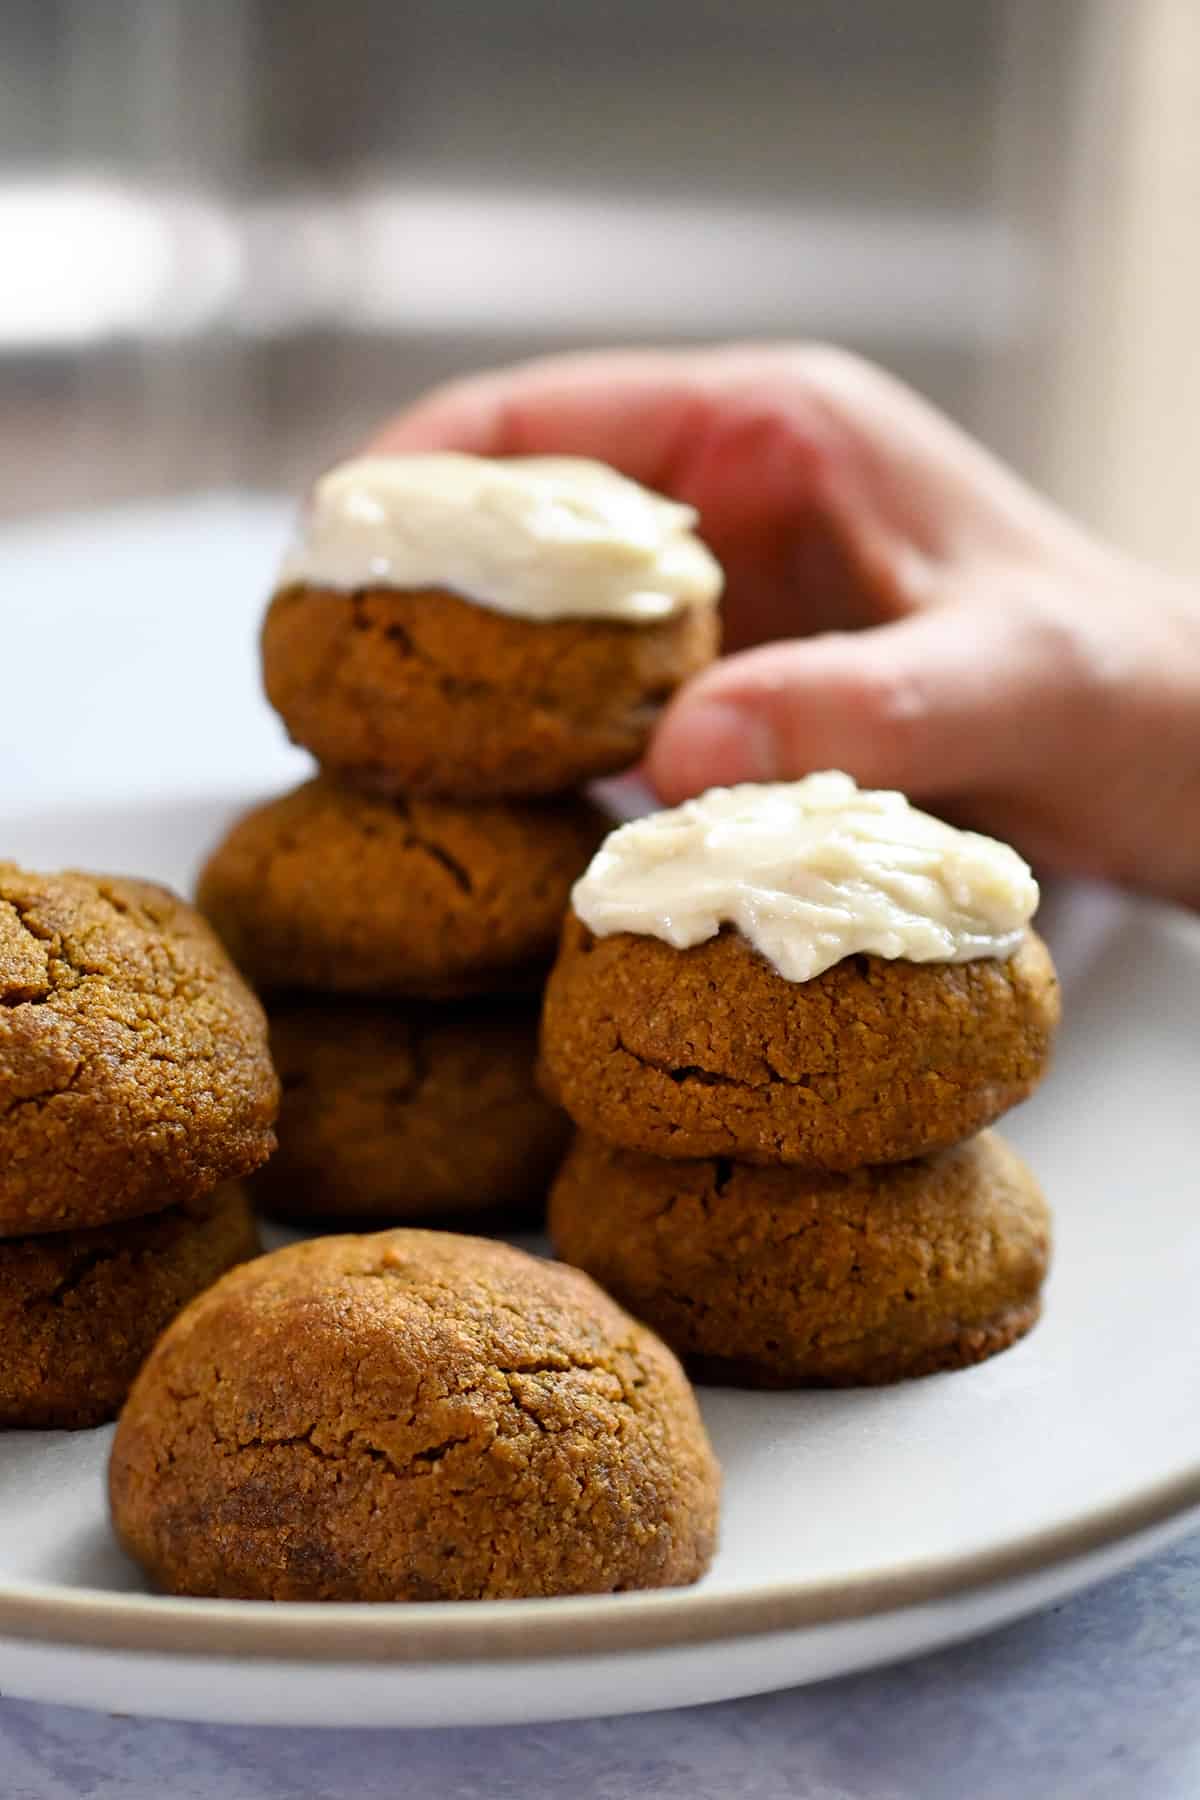 A hand is grabbing a dairy-free cream-cheese frosted pumpkin cookie from a plate filled with cookies.